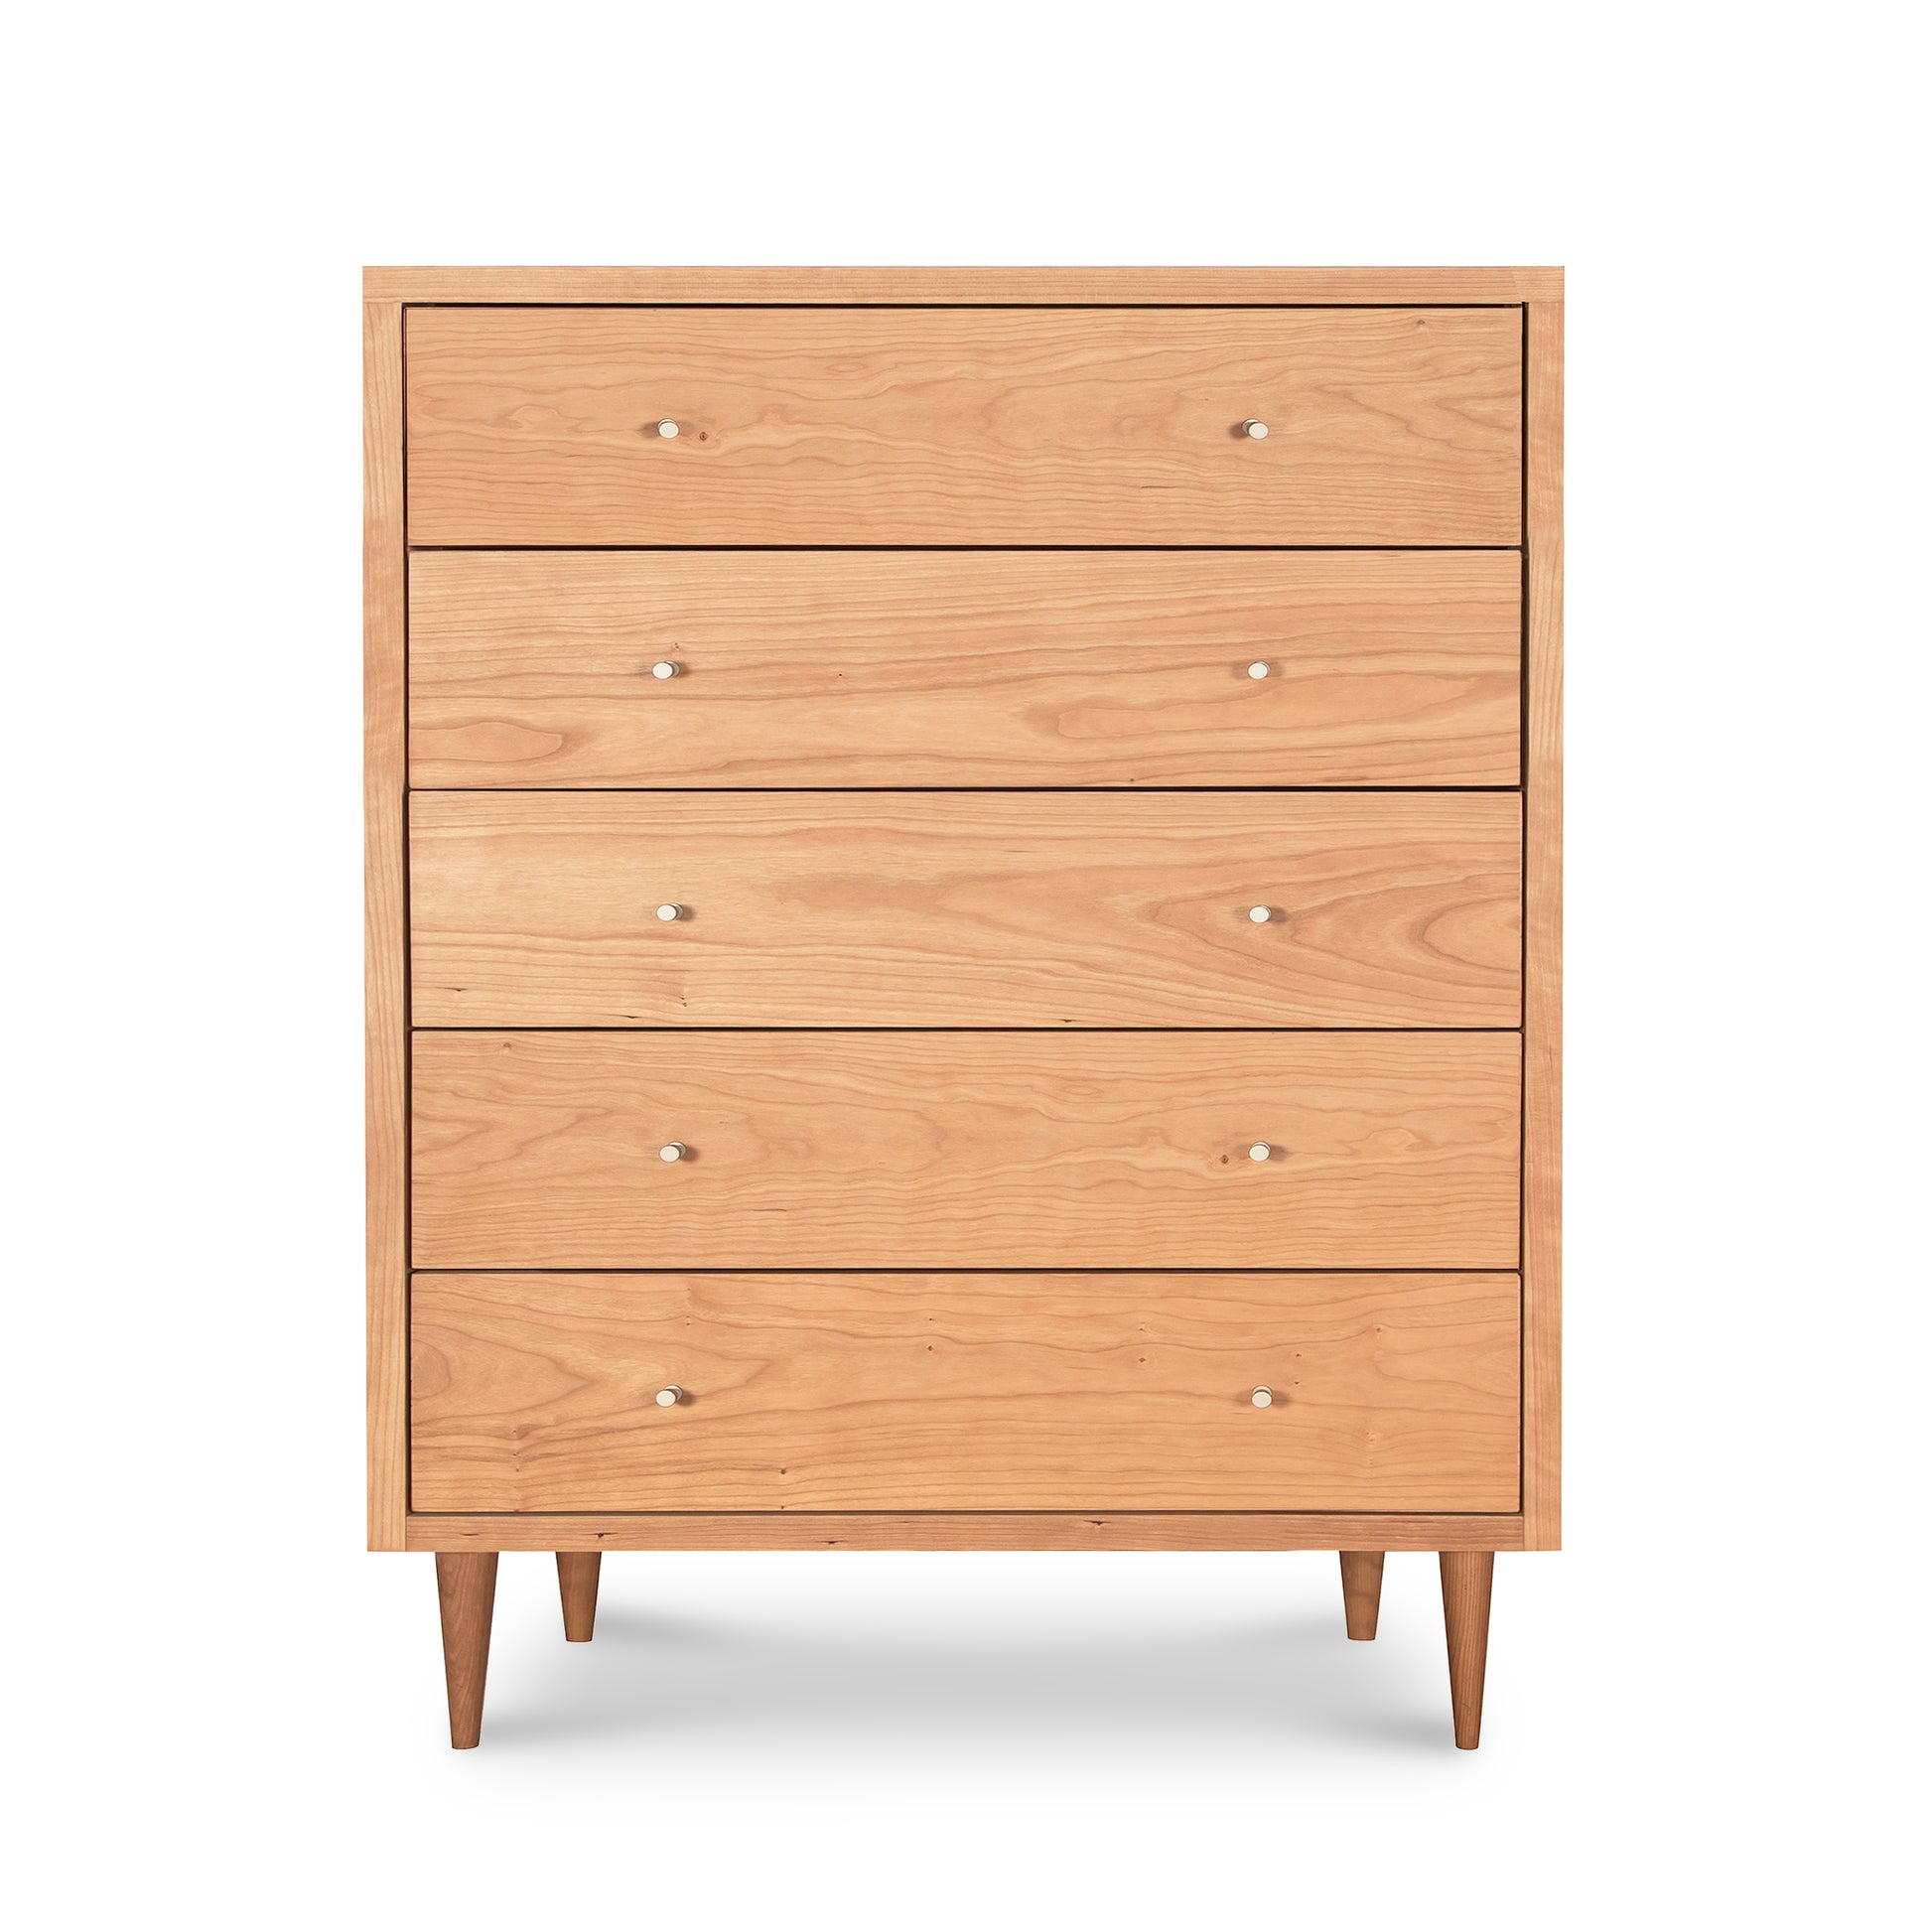 A mid-century modern, natural cherry Larssen 5-Drawer Wide Chest with round knobs and angled legs isolated on a white background by Vermont Furniture Designs.